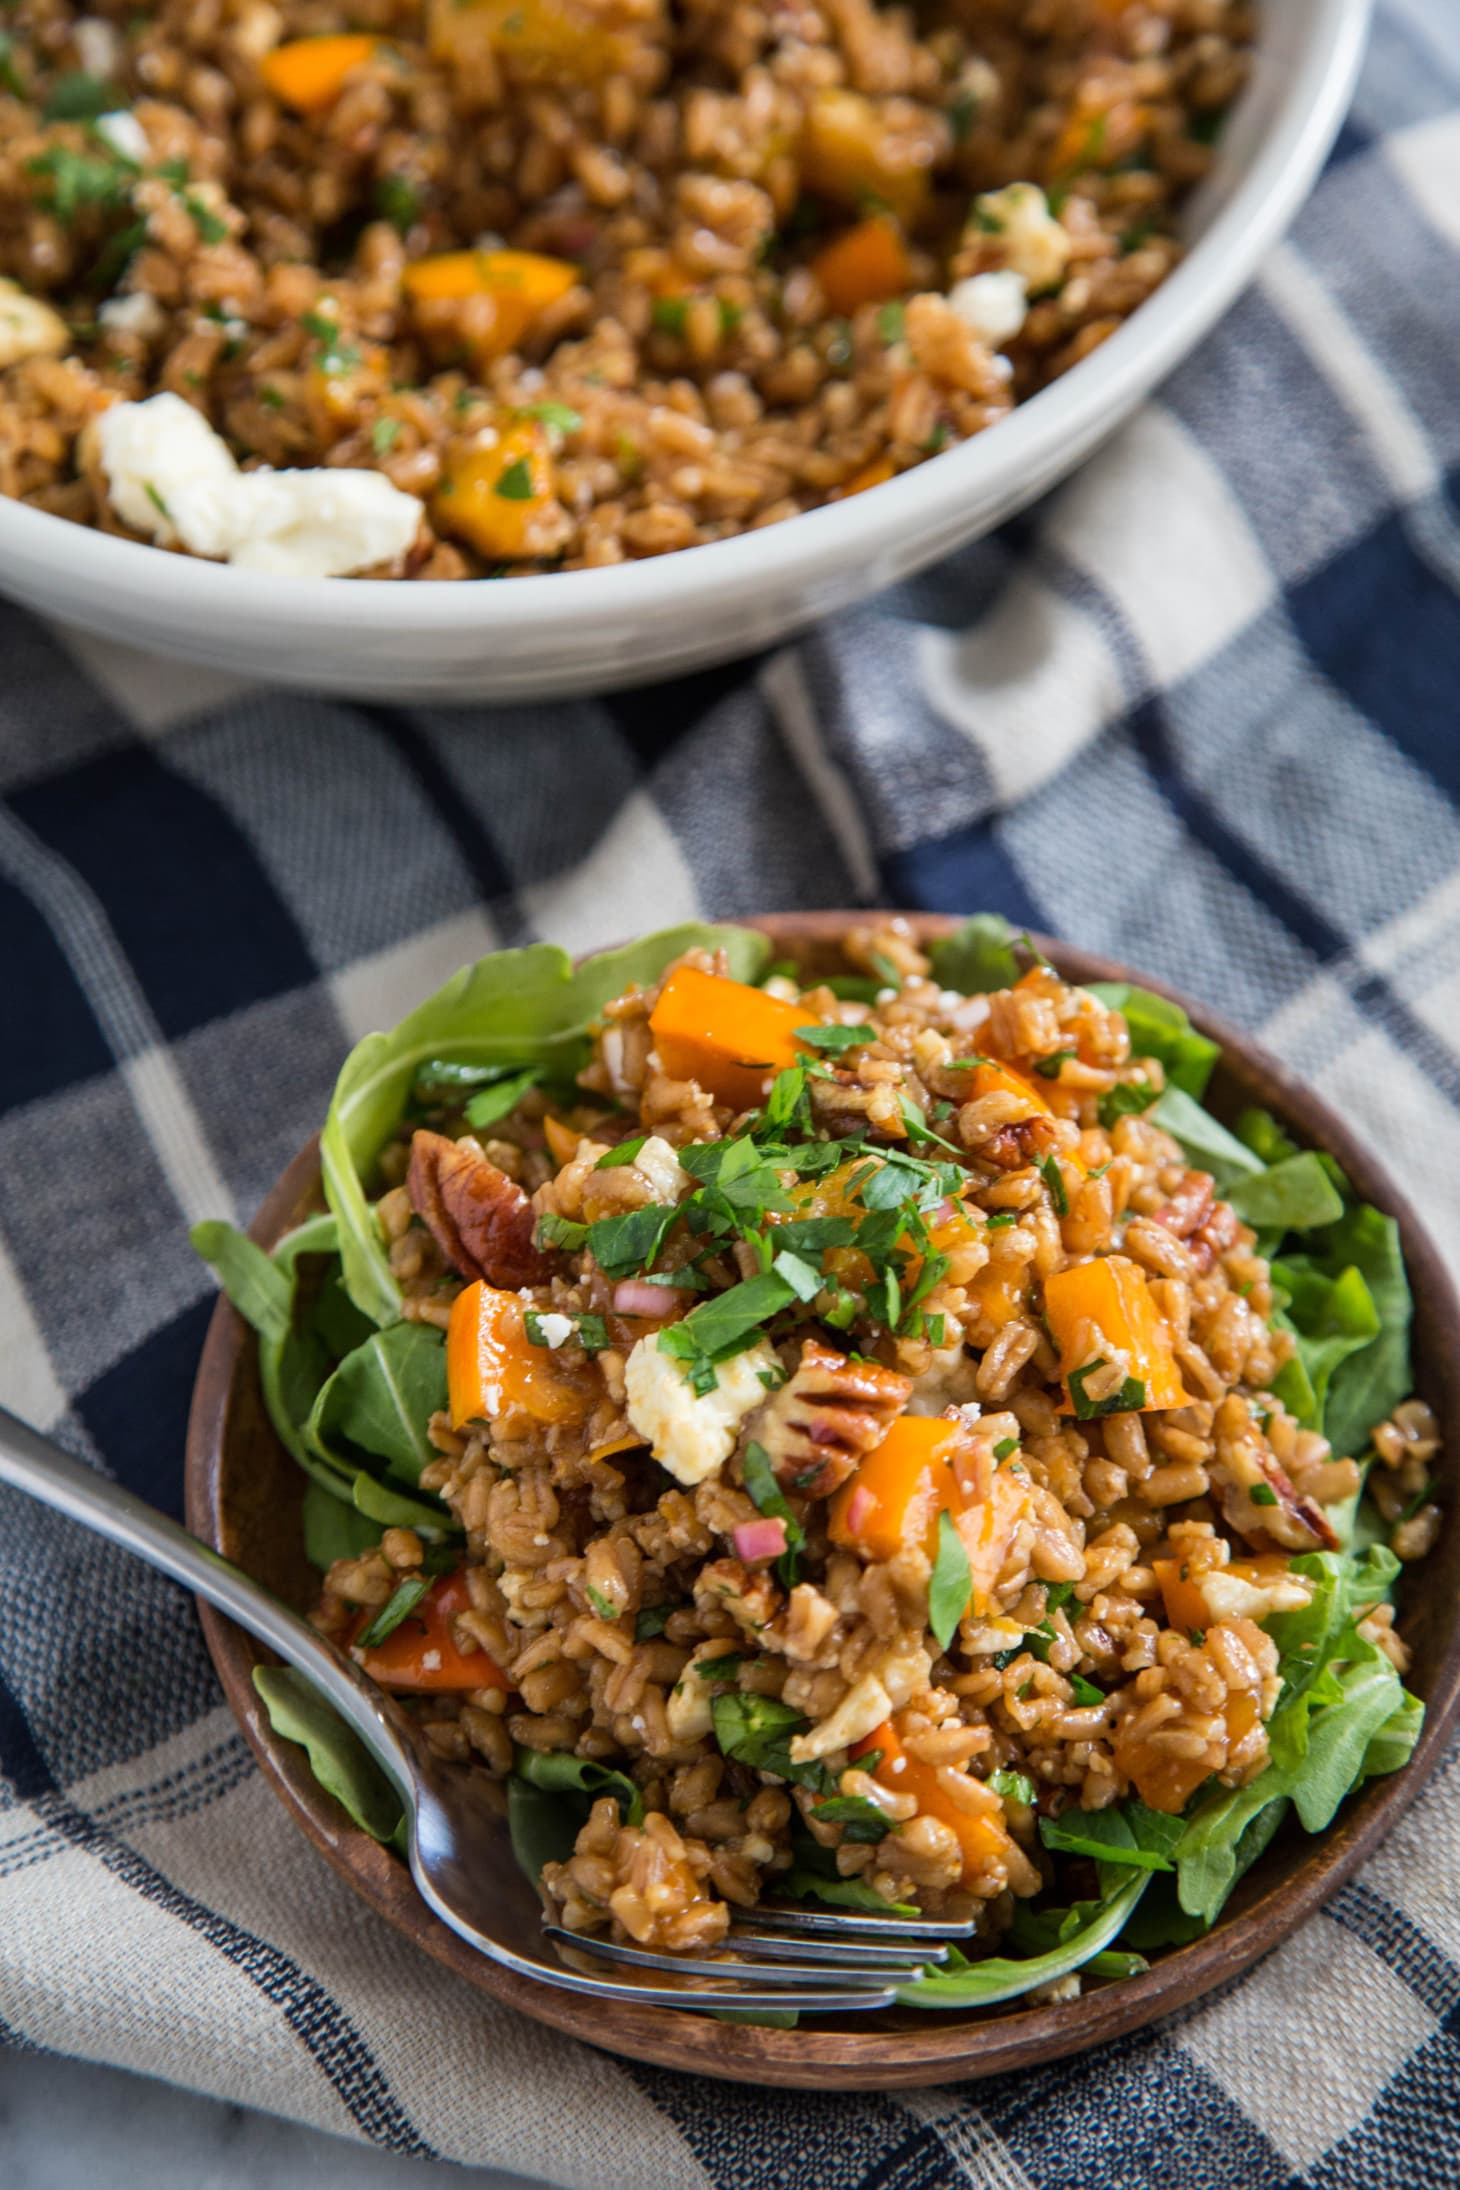 Recipe: Warm Farro Salad with Roasted Squash, Persimmons & Pecans | Kitchn